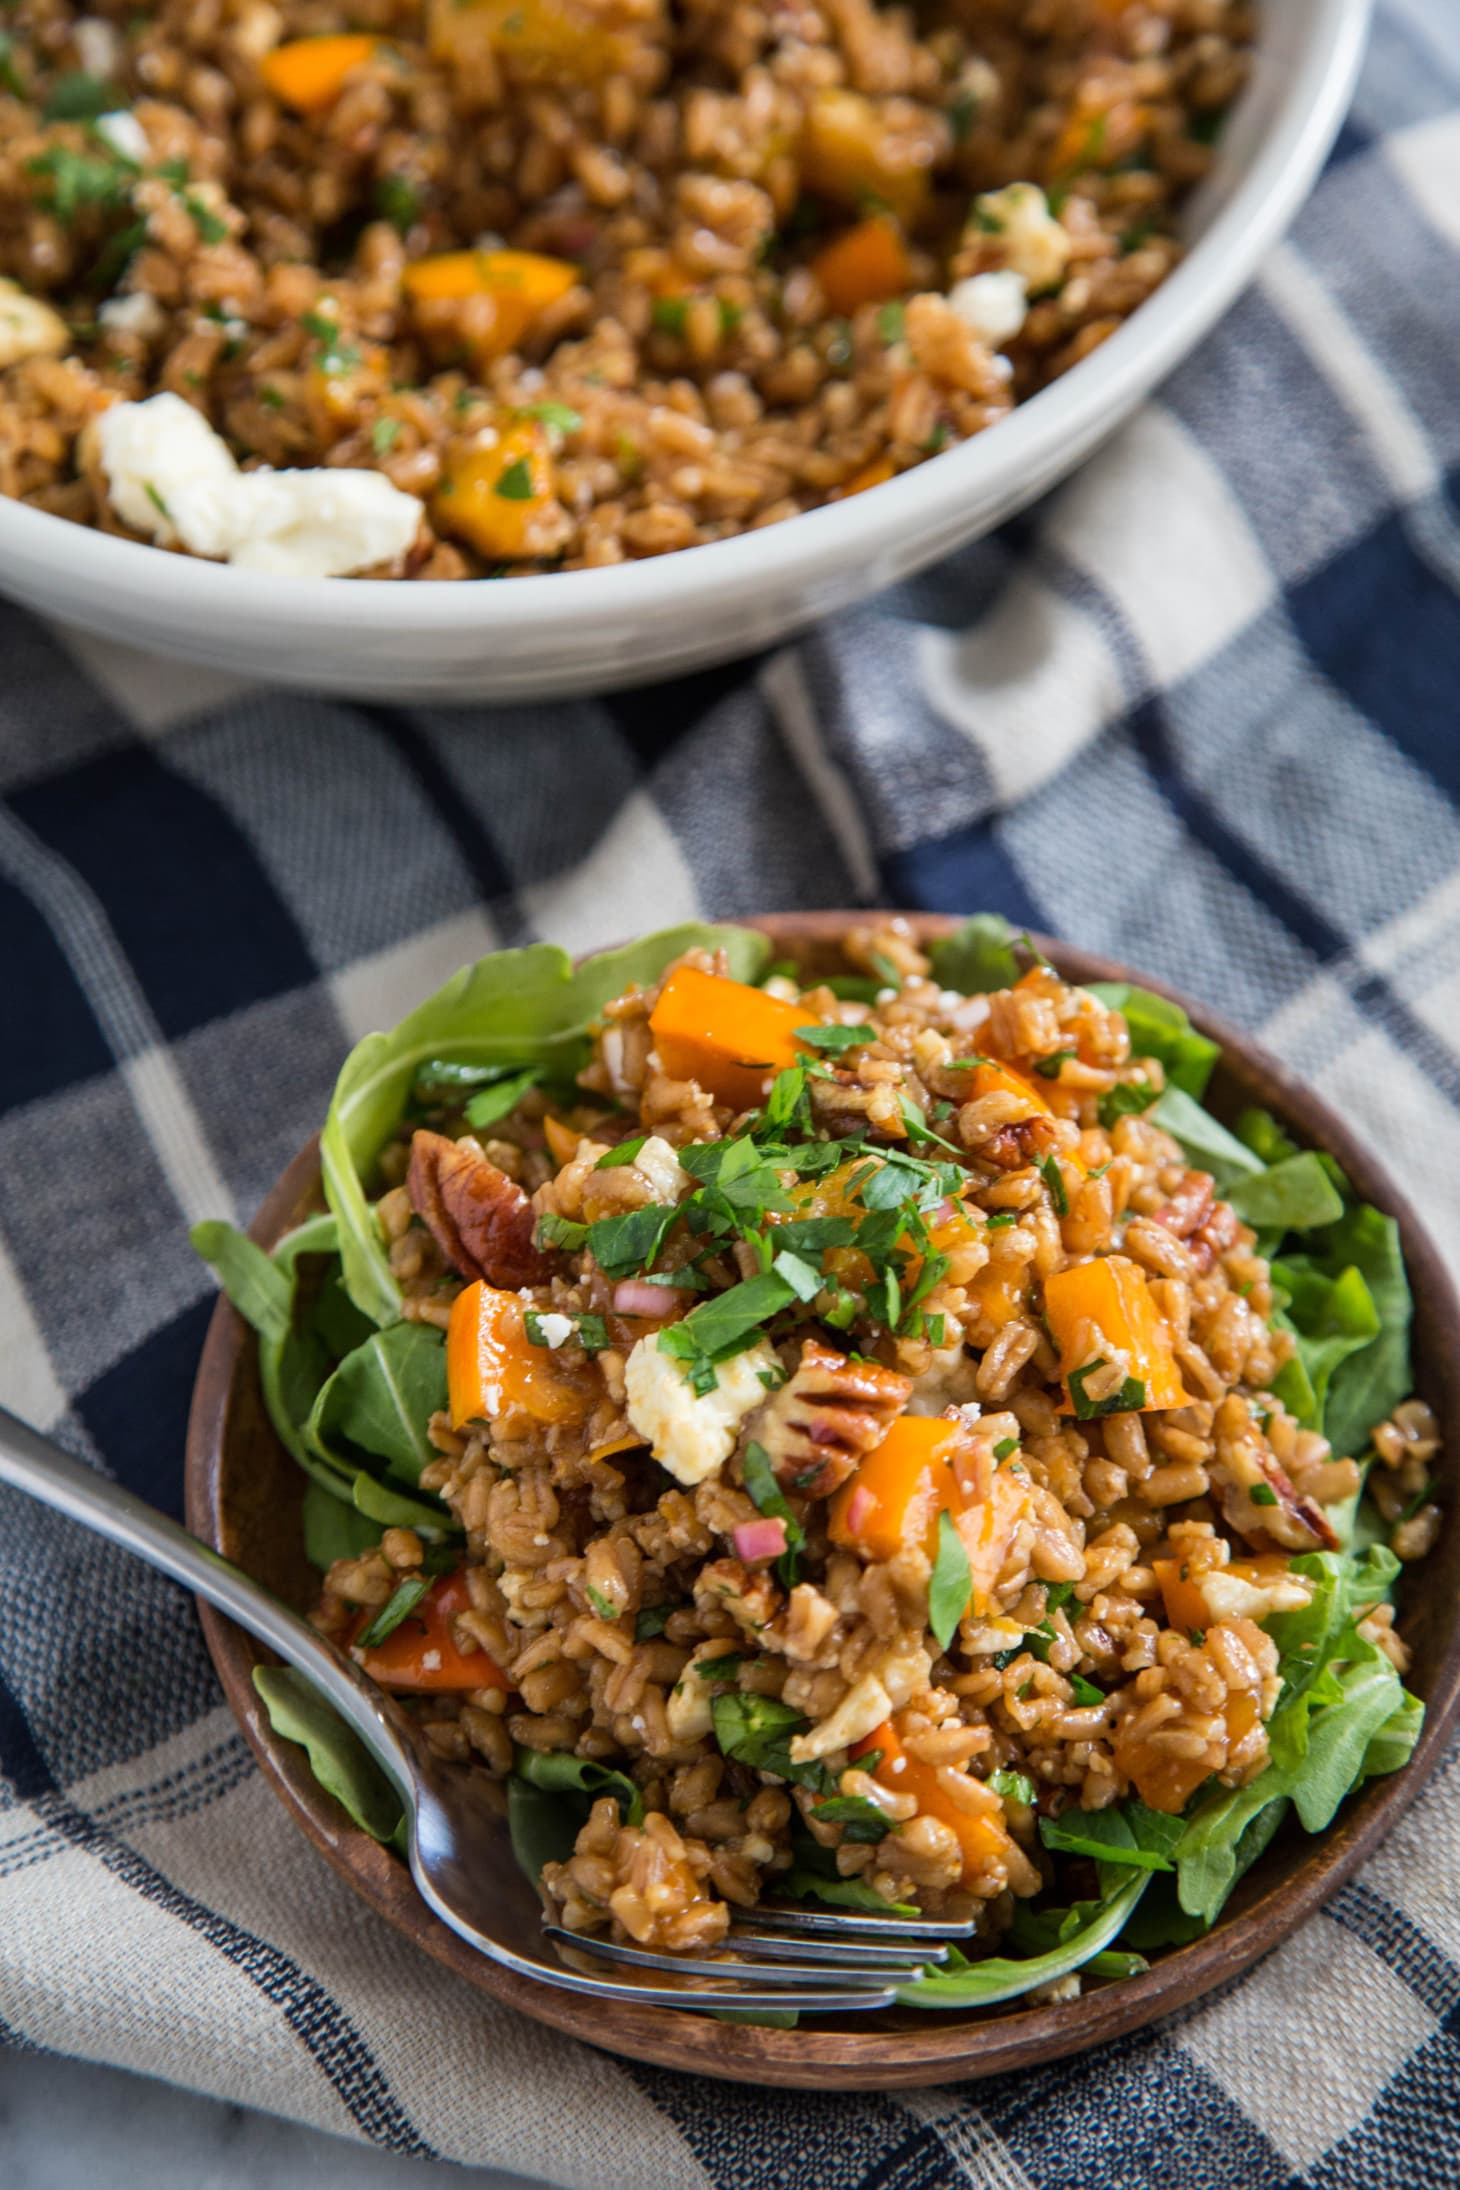 Recipe: Warm Farro Salad with Roasted Squash, Persimmons & Pecans | Kitchn